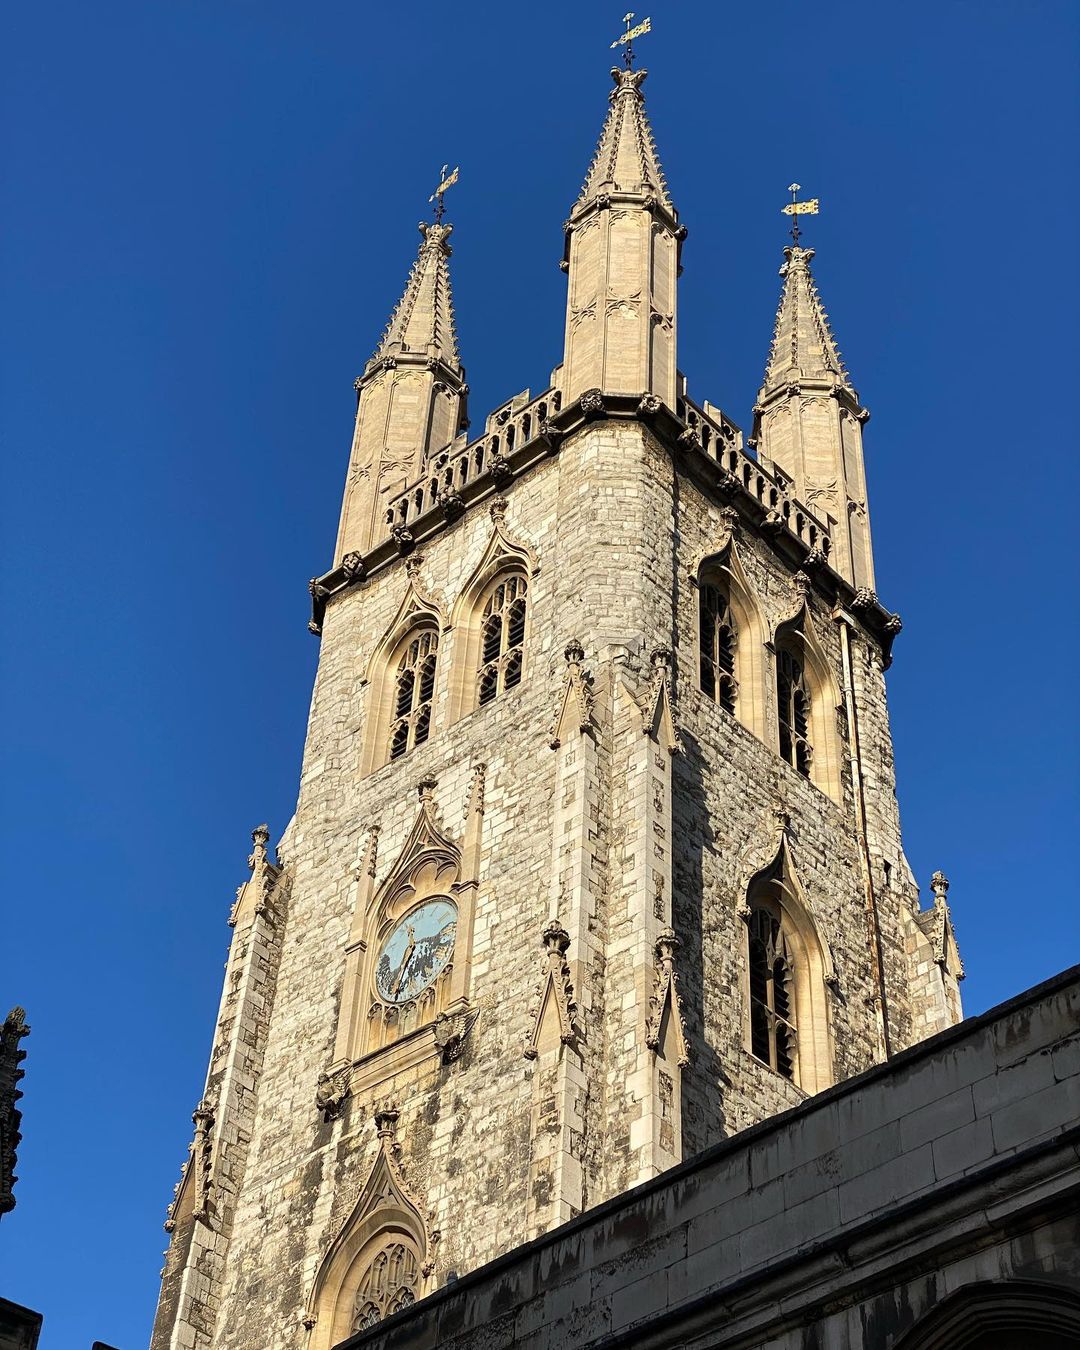 The bell tower of St. Sepulchre-without-Newgate in London, with four steeples, with one unseen